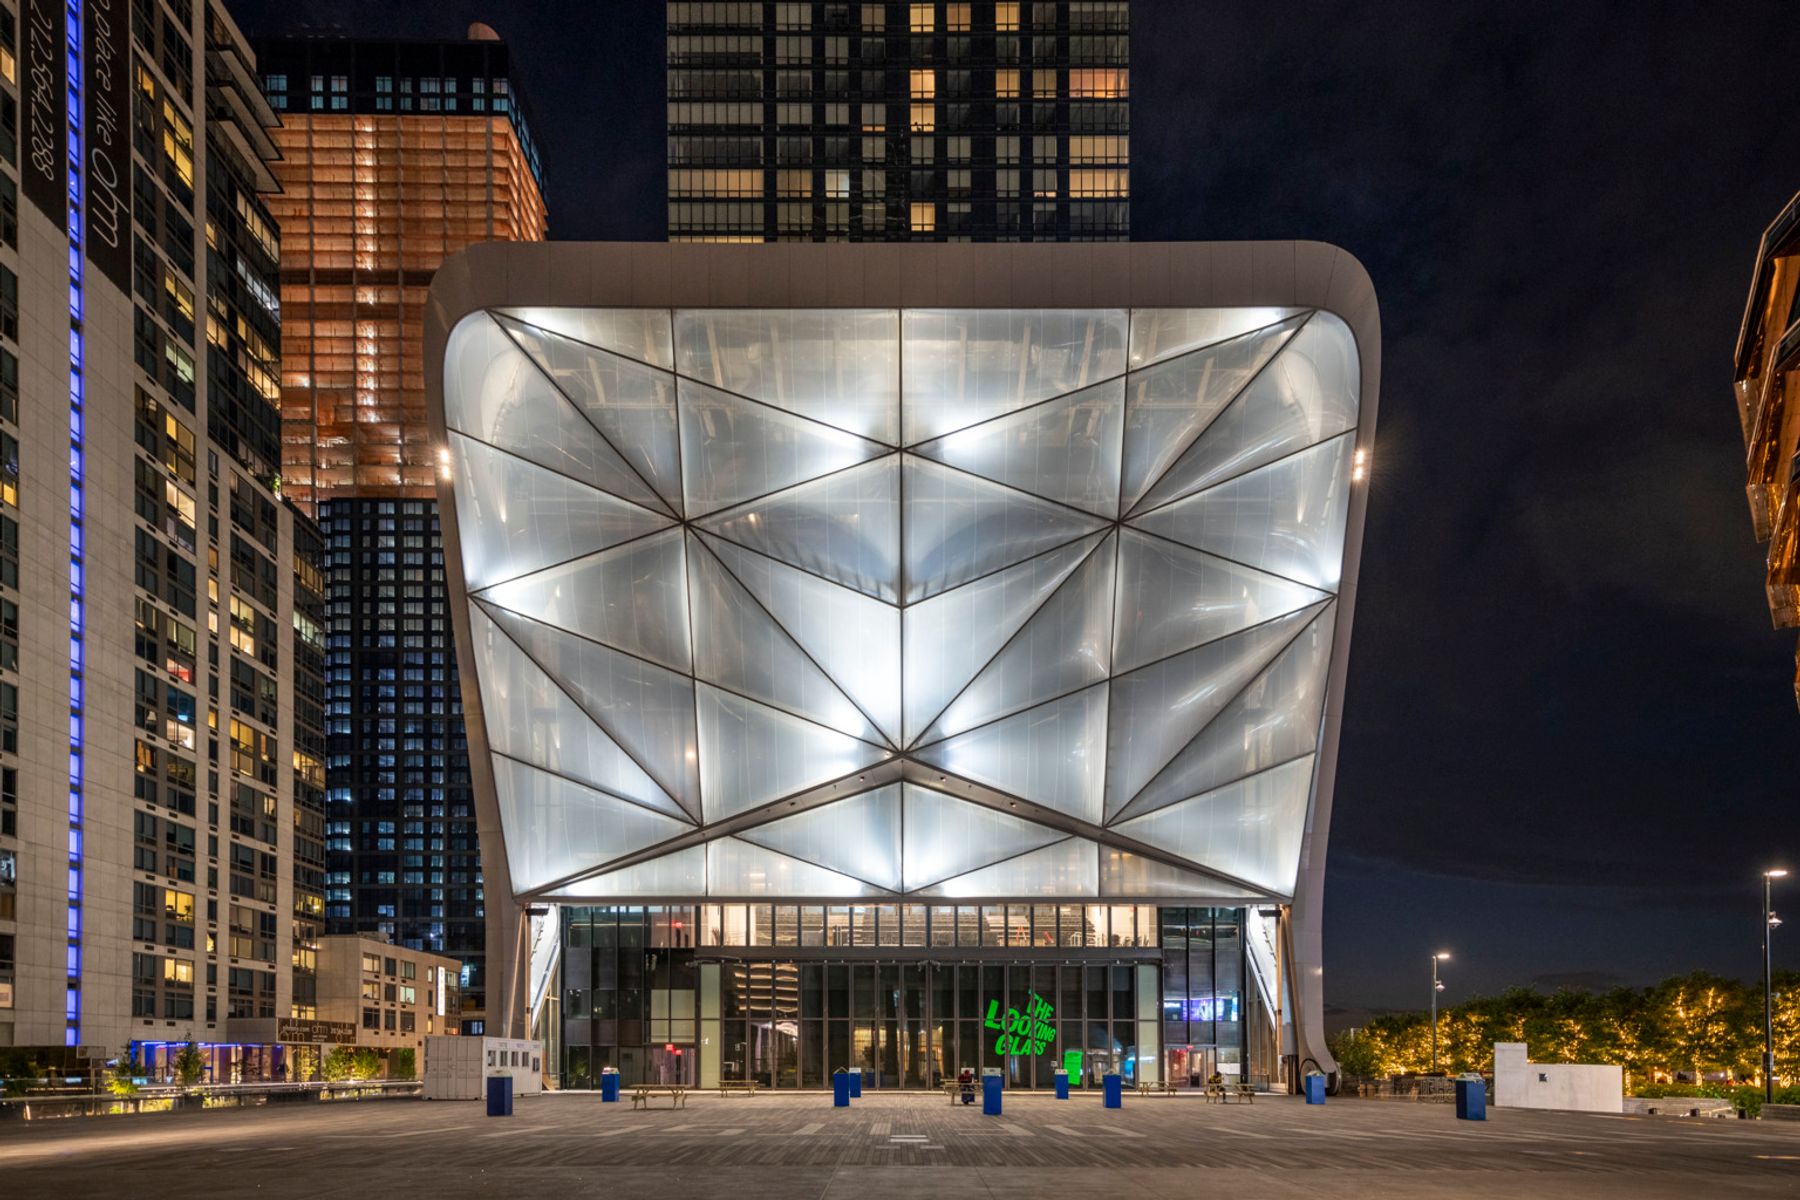 The Shed/Hudson Yards, New York. Architecture: Diller Scofidio + Renfro, New York (lead architects), Rockwell Group, New York (collaborating architects). Lighting design: Tillotson Design Associates, New York. Photography: Timothy Schenk, New York